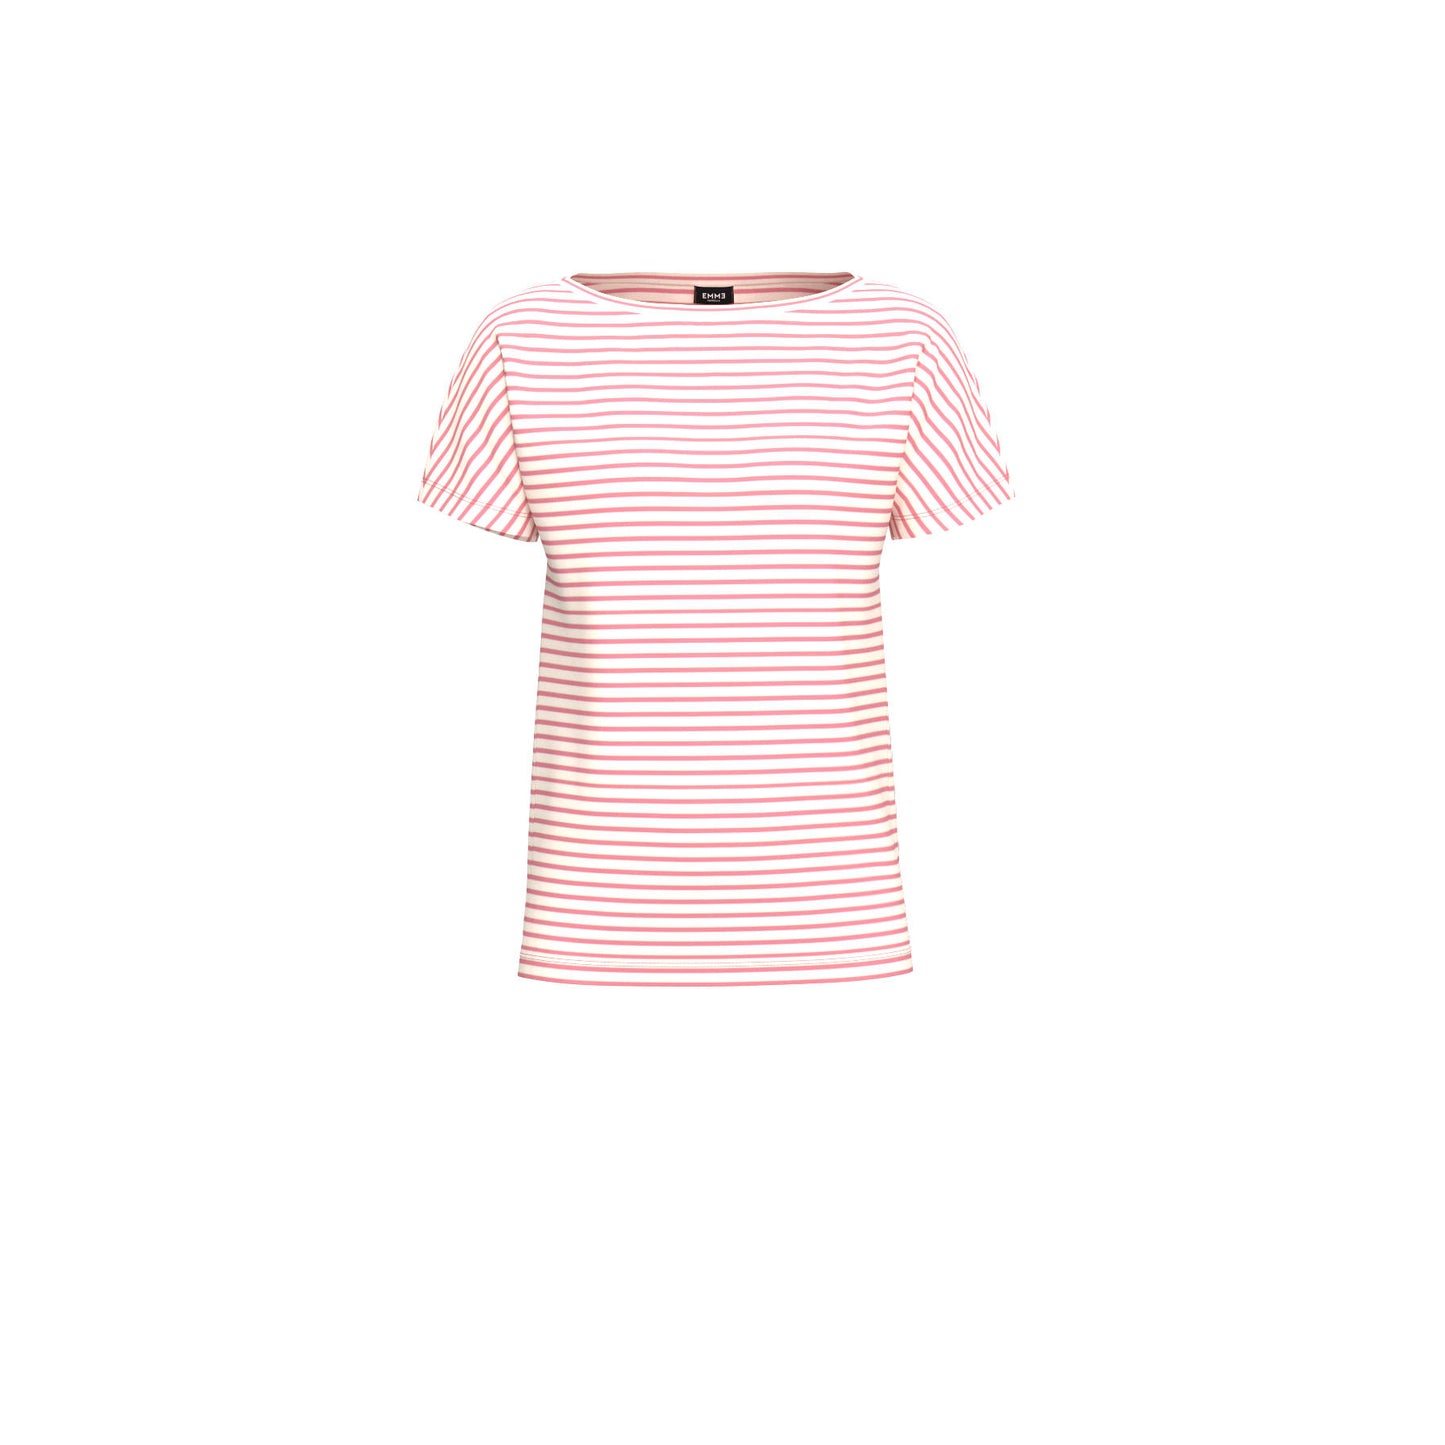 EMME MARELLA - T-shirt in jersey a righe DINGEY